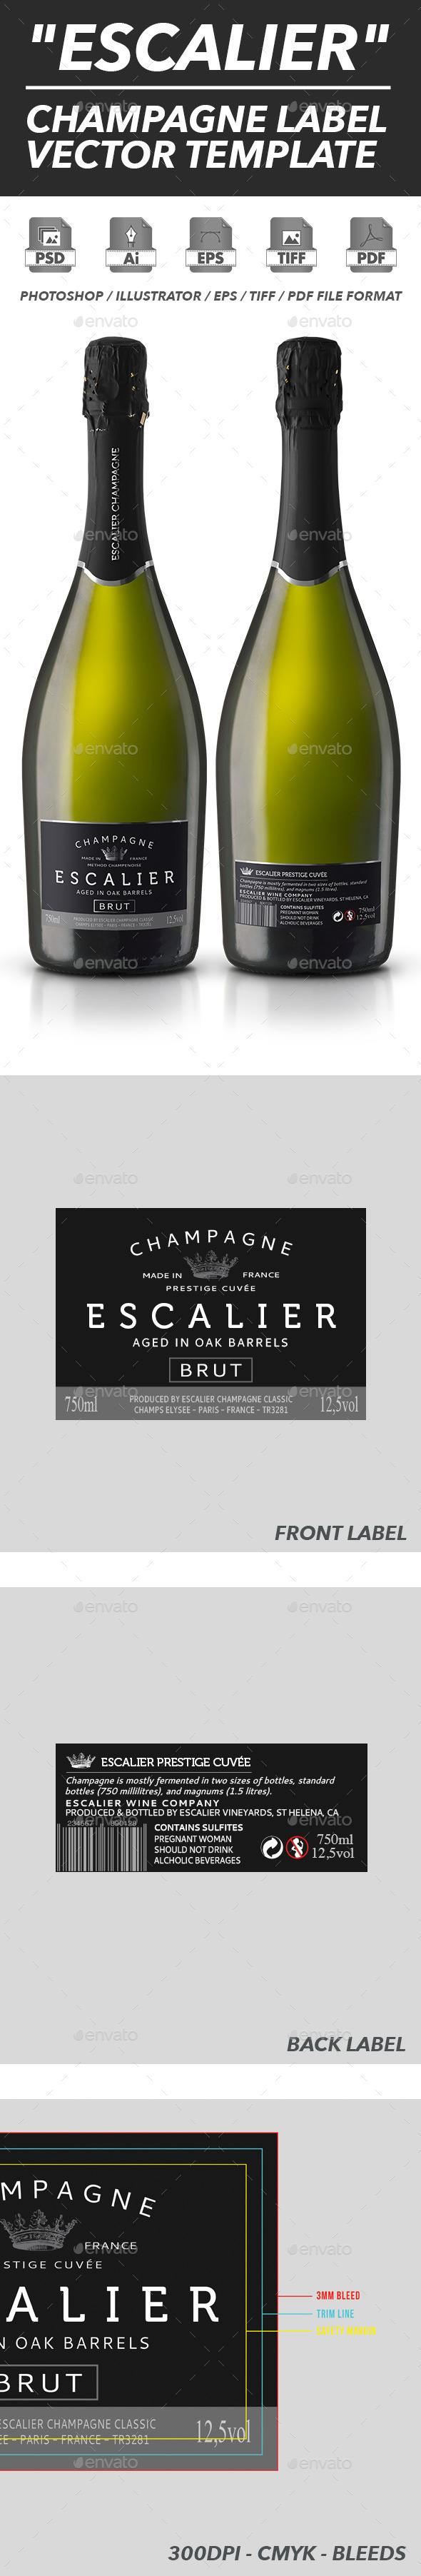 Champagne Label Vector Template